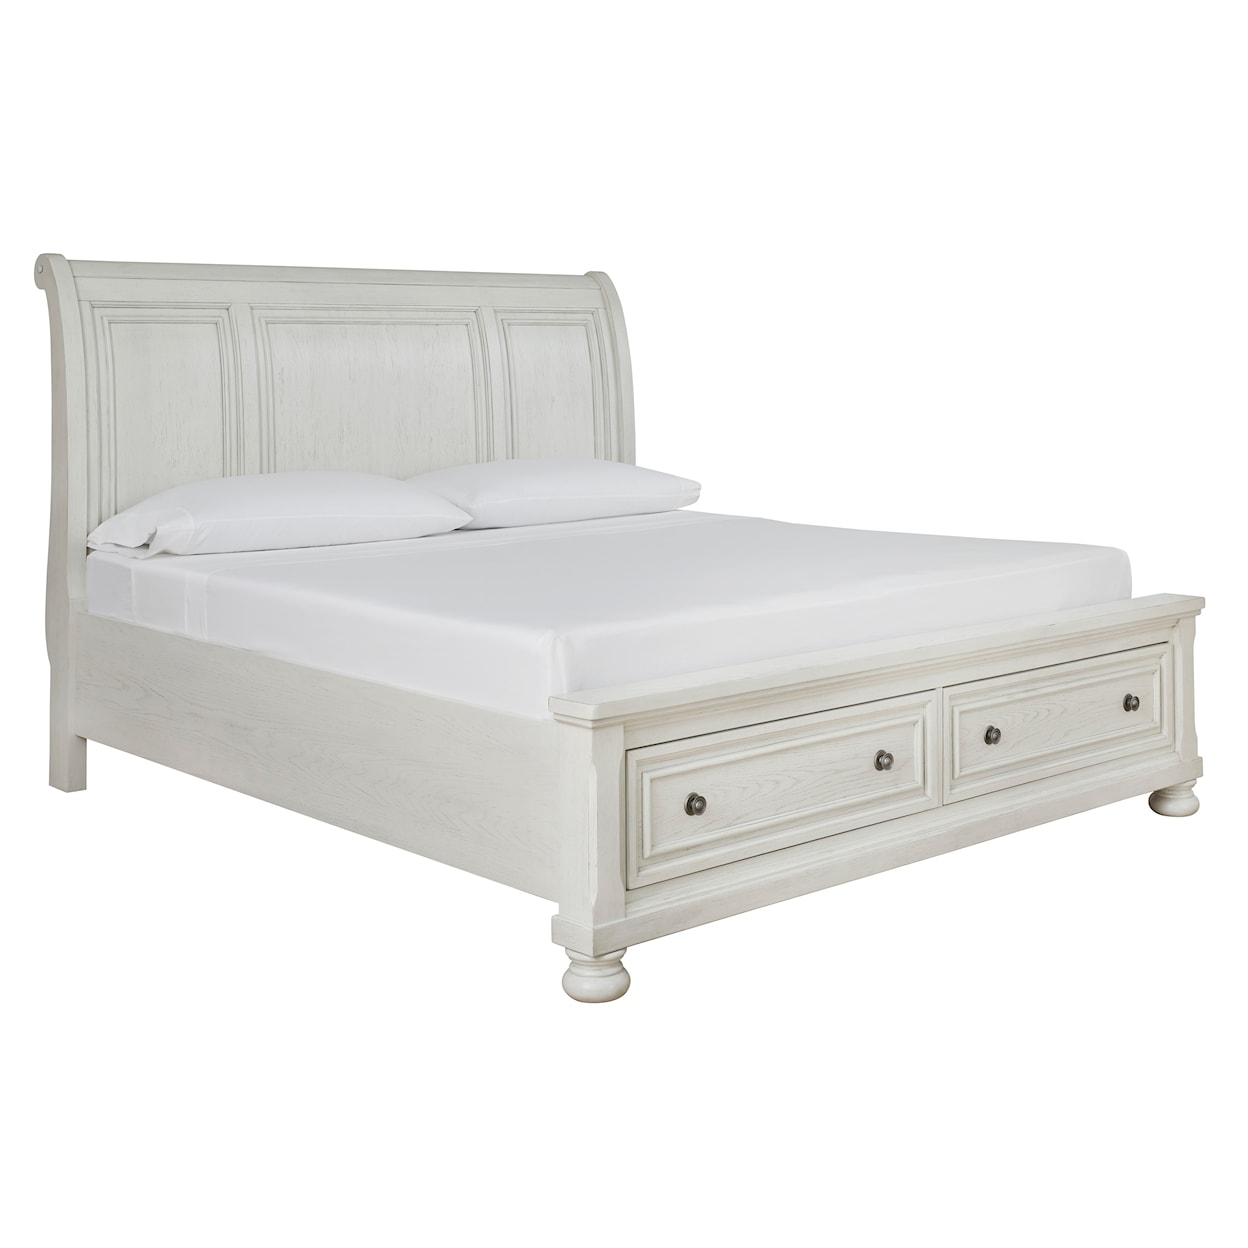 Signature Design Robbinsdale California King Sleigh Bed with Storage